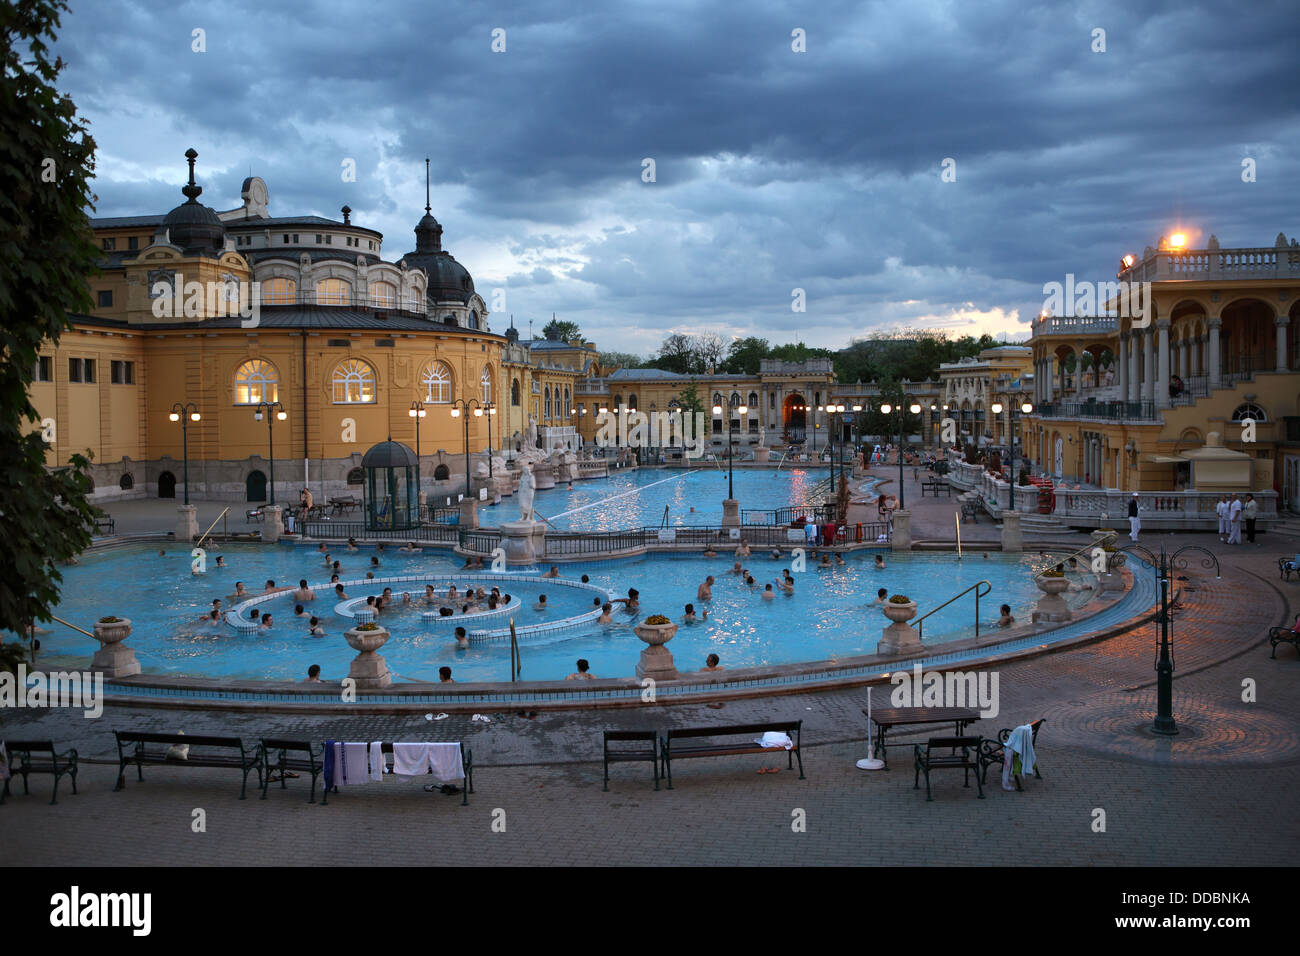 Budapest, Hungary Szechenyi thermal baths in the evening Stock Photo